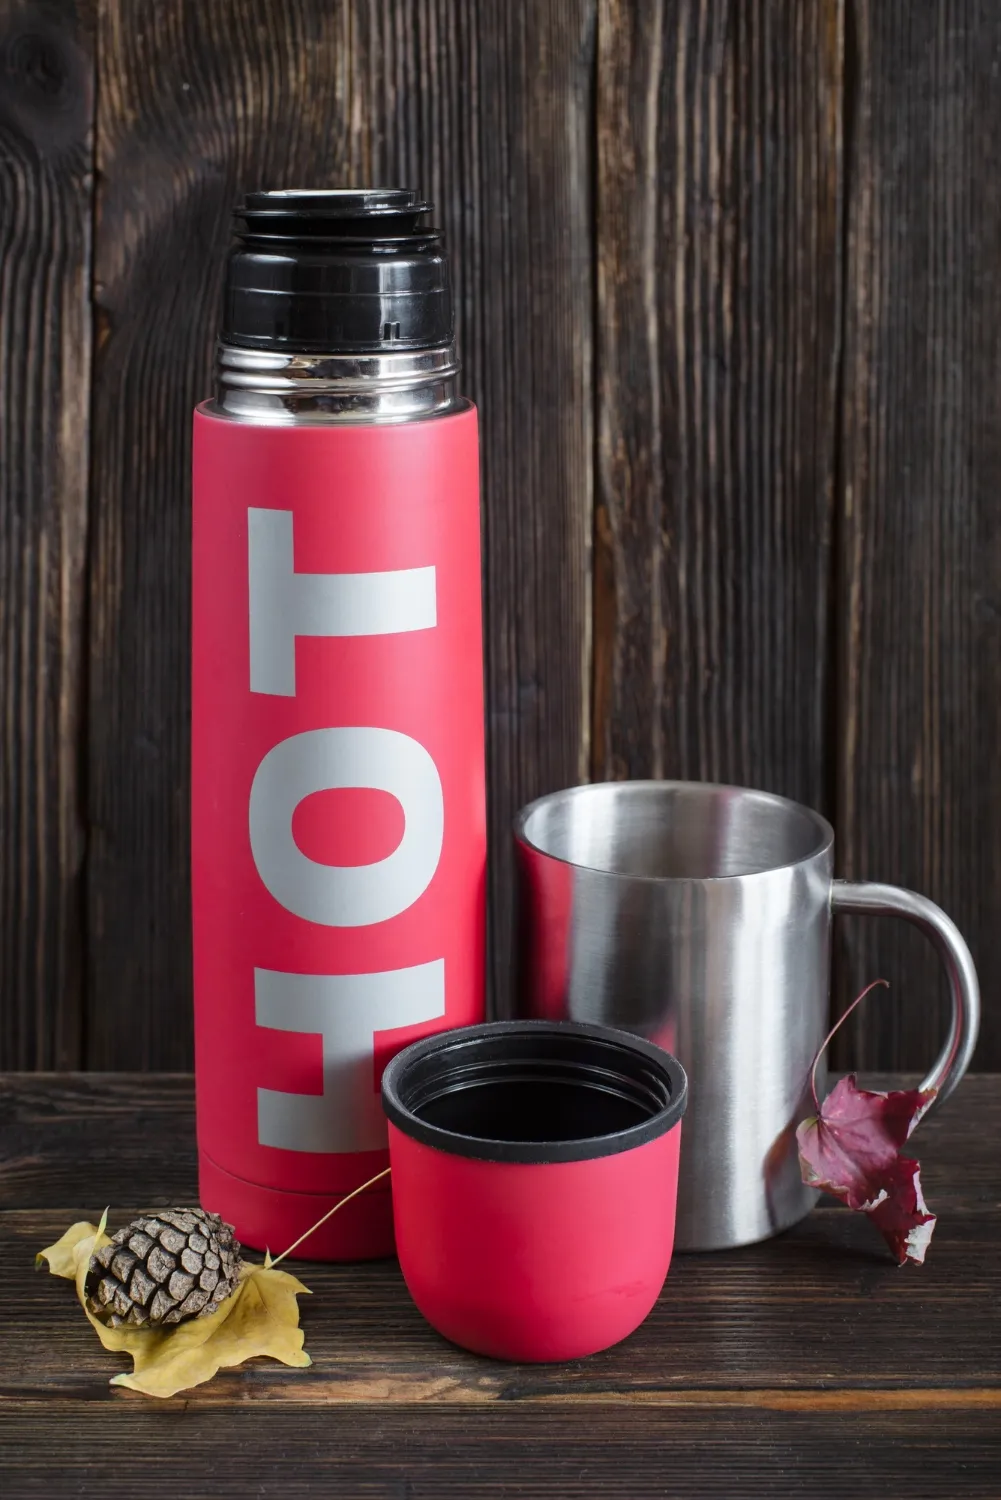 Red thermos flask with hot sign, opened cover and metal travel mug on wooden background, decorated with autumn leaves